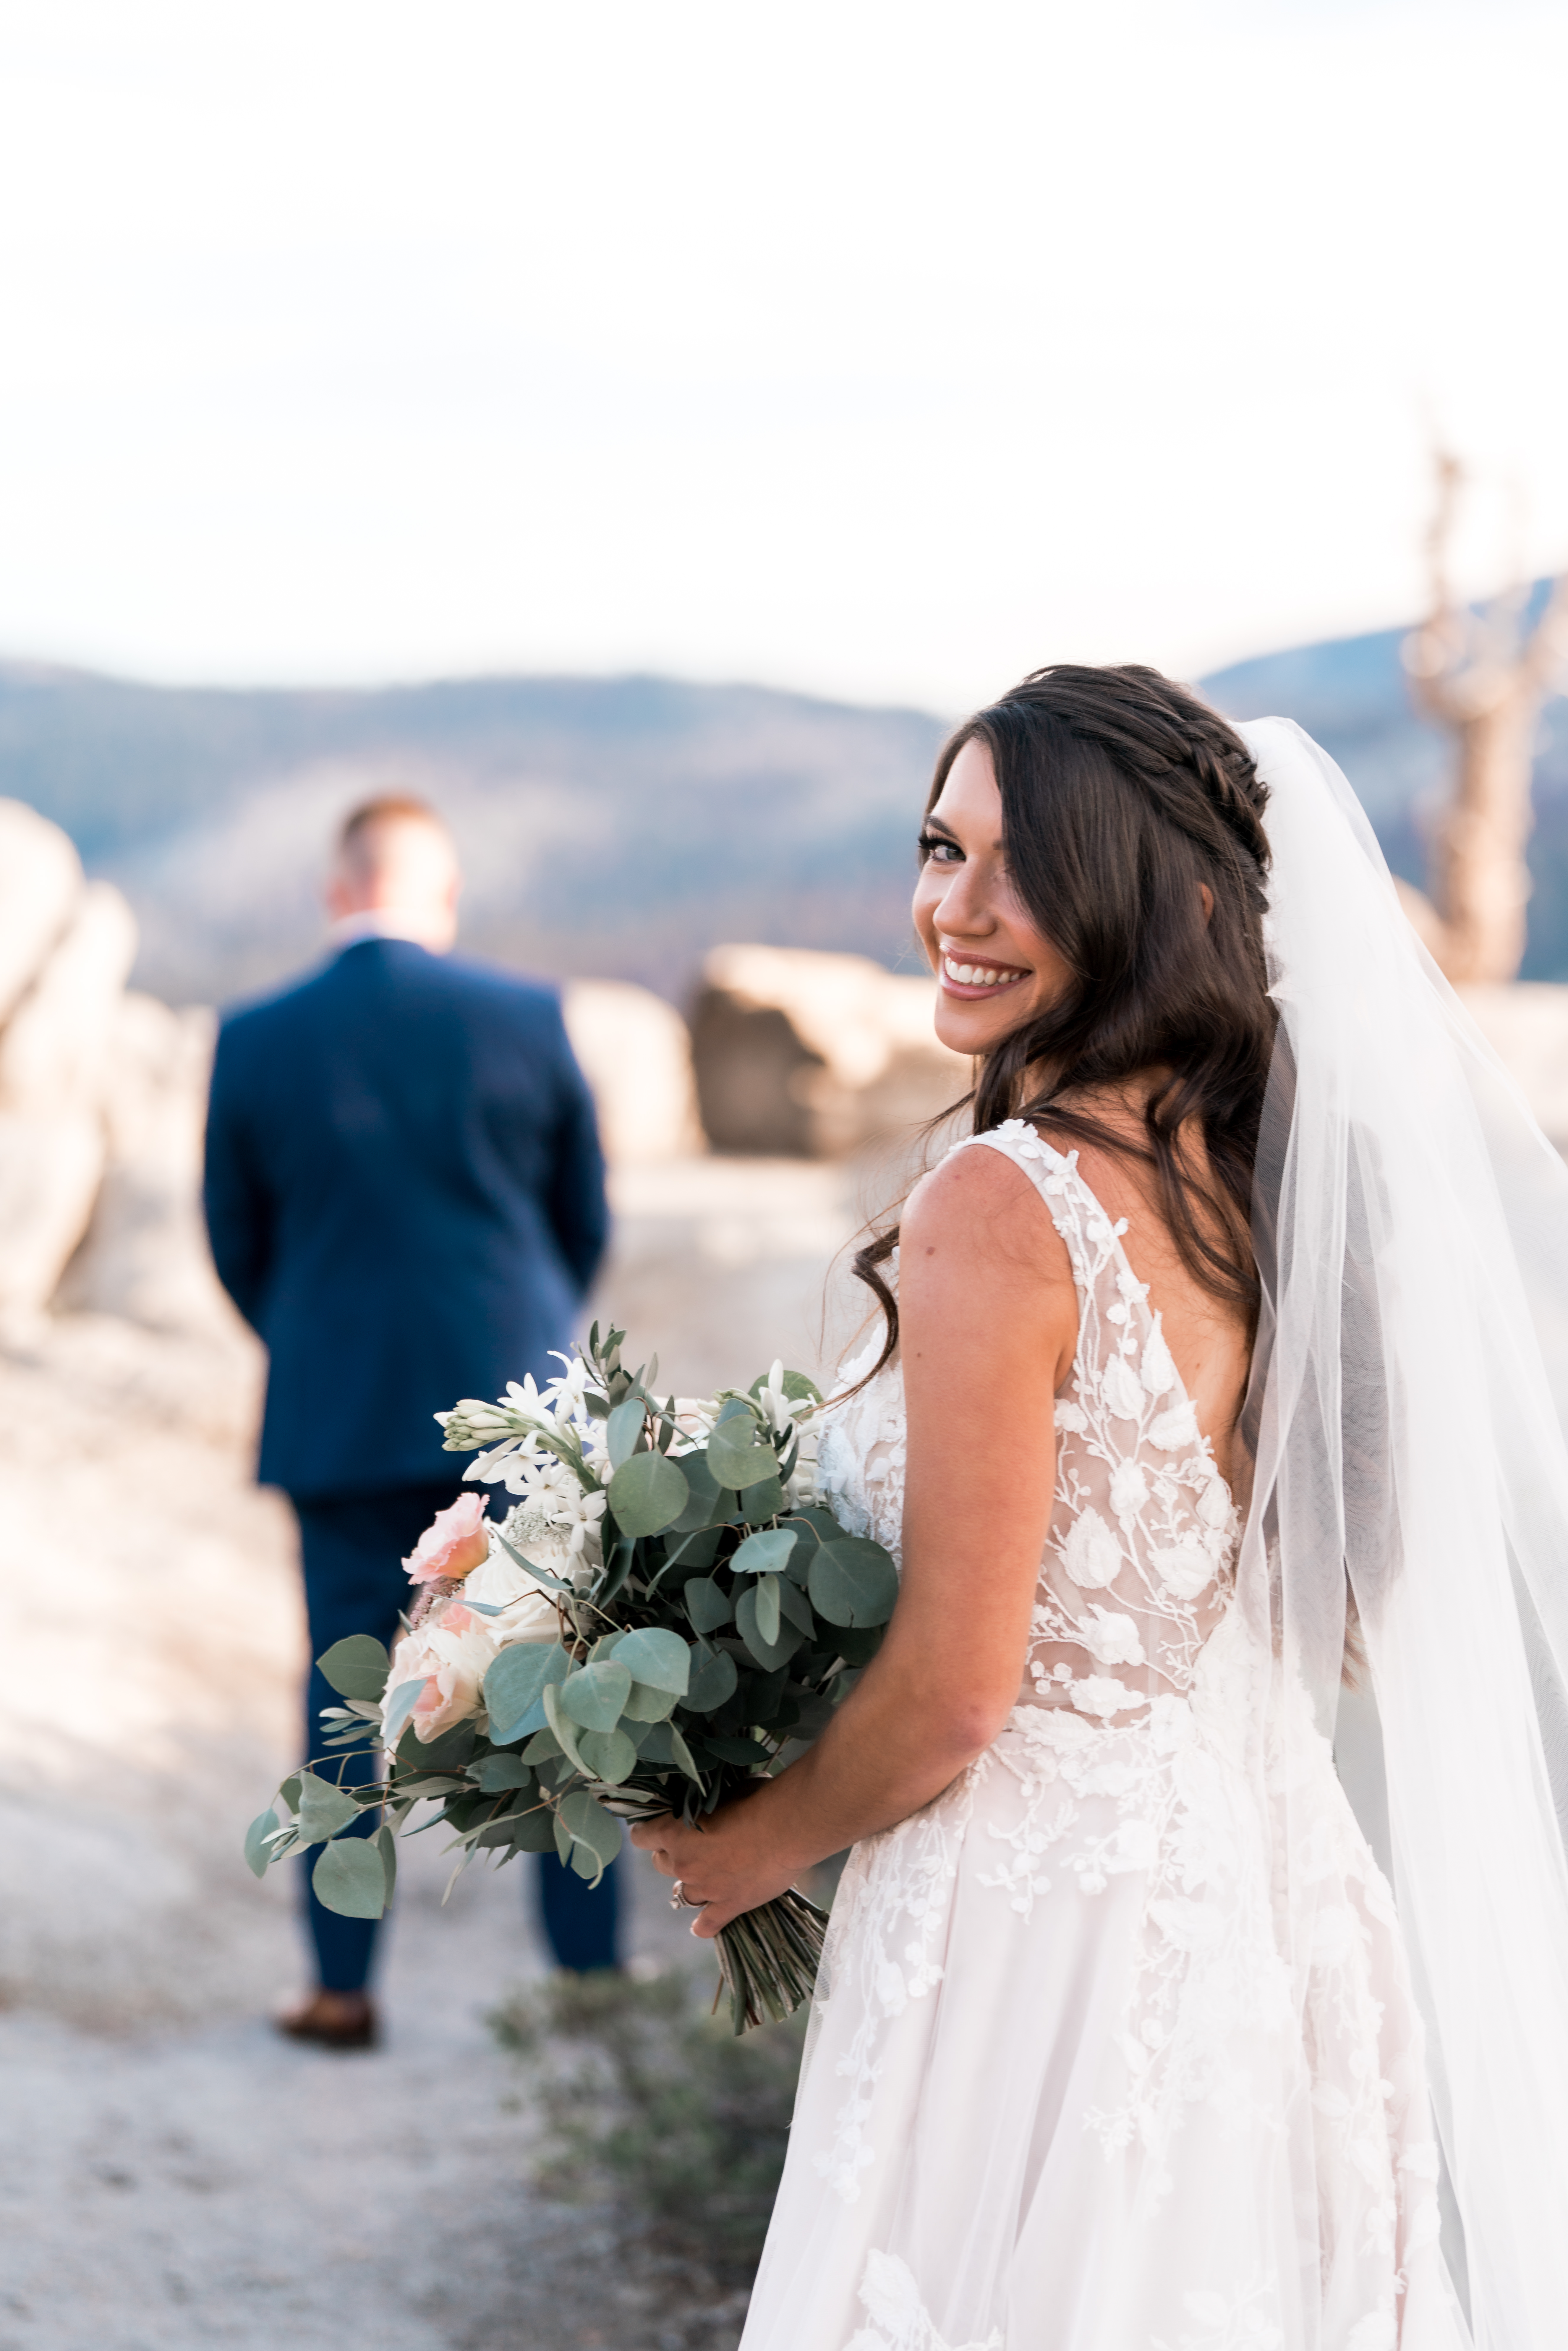 Yosemite Elopement Vow Renewal in the fall